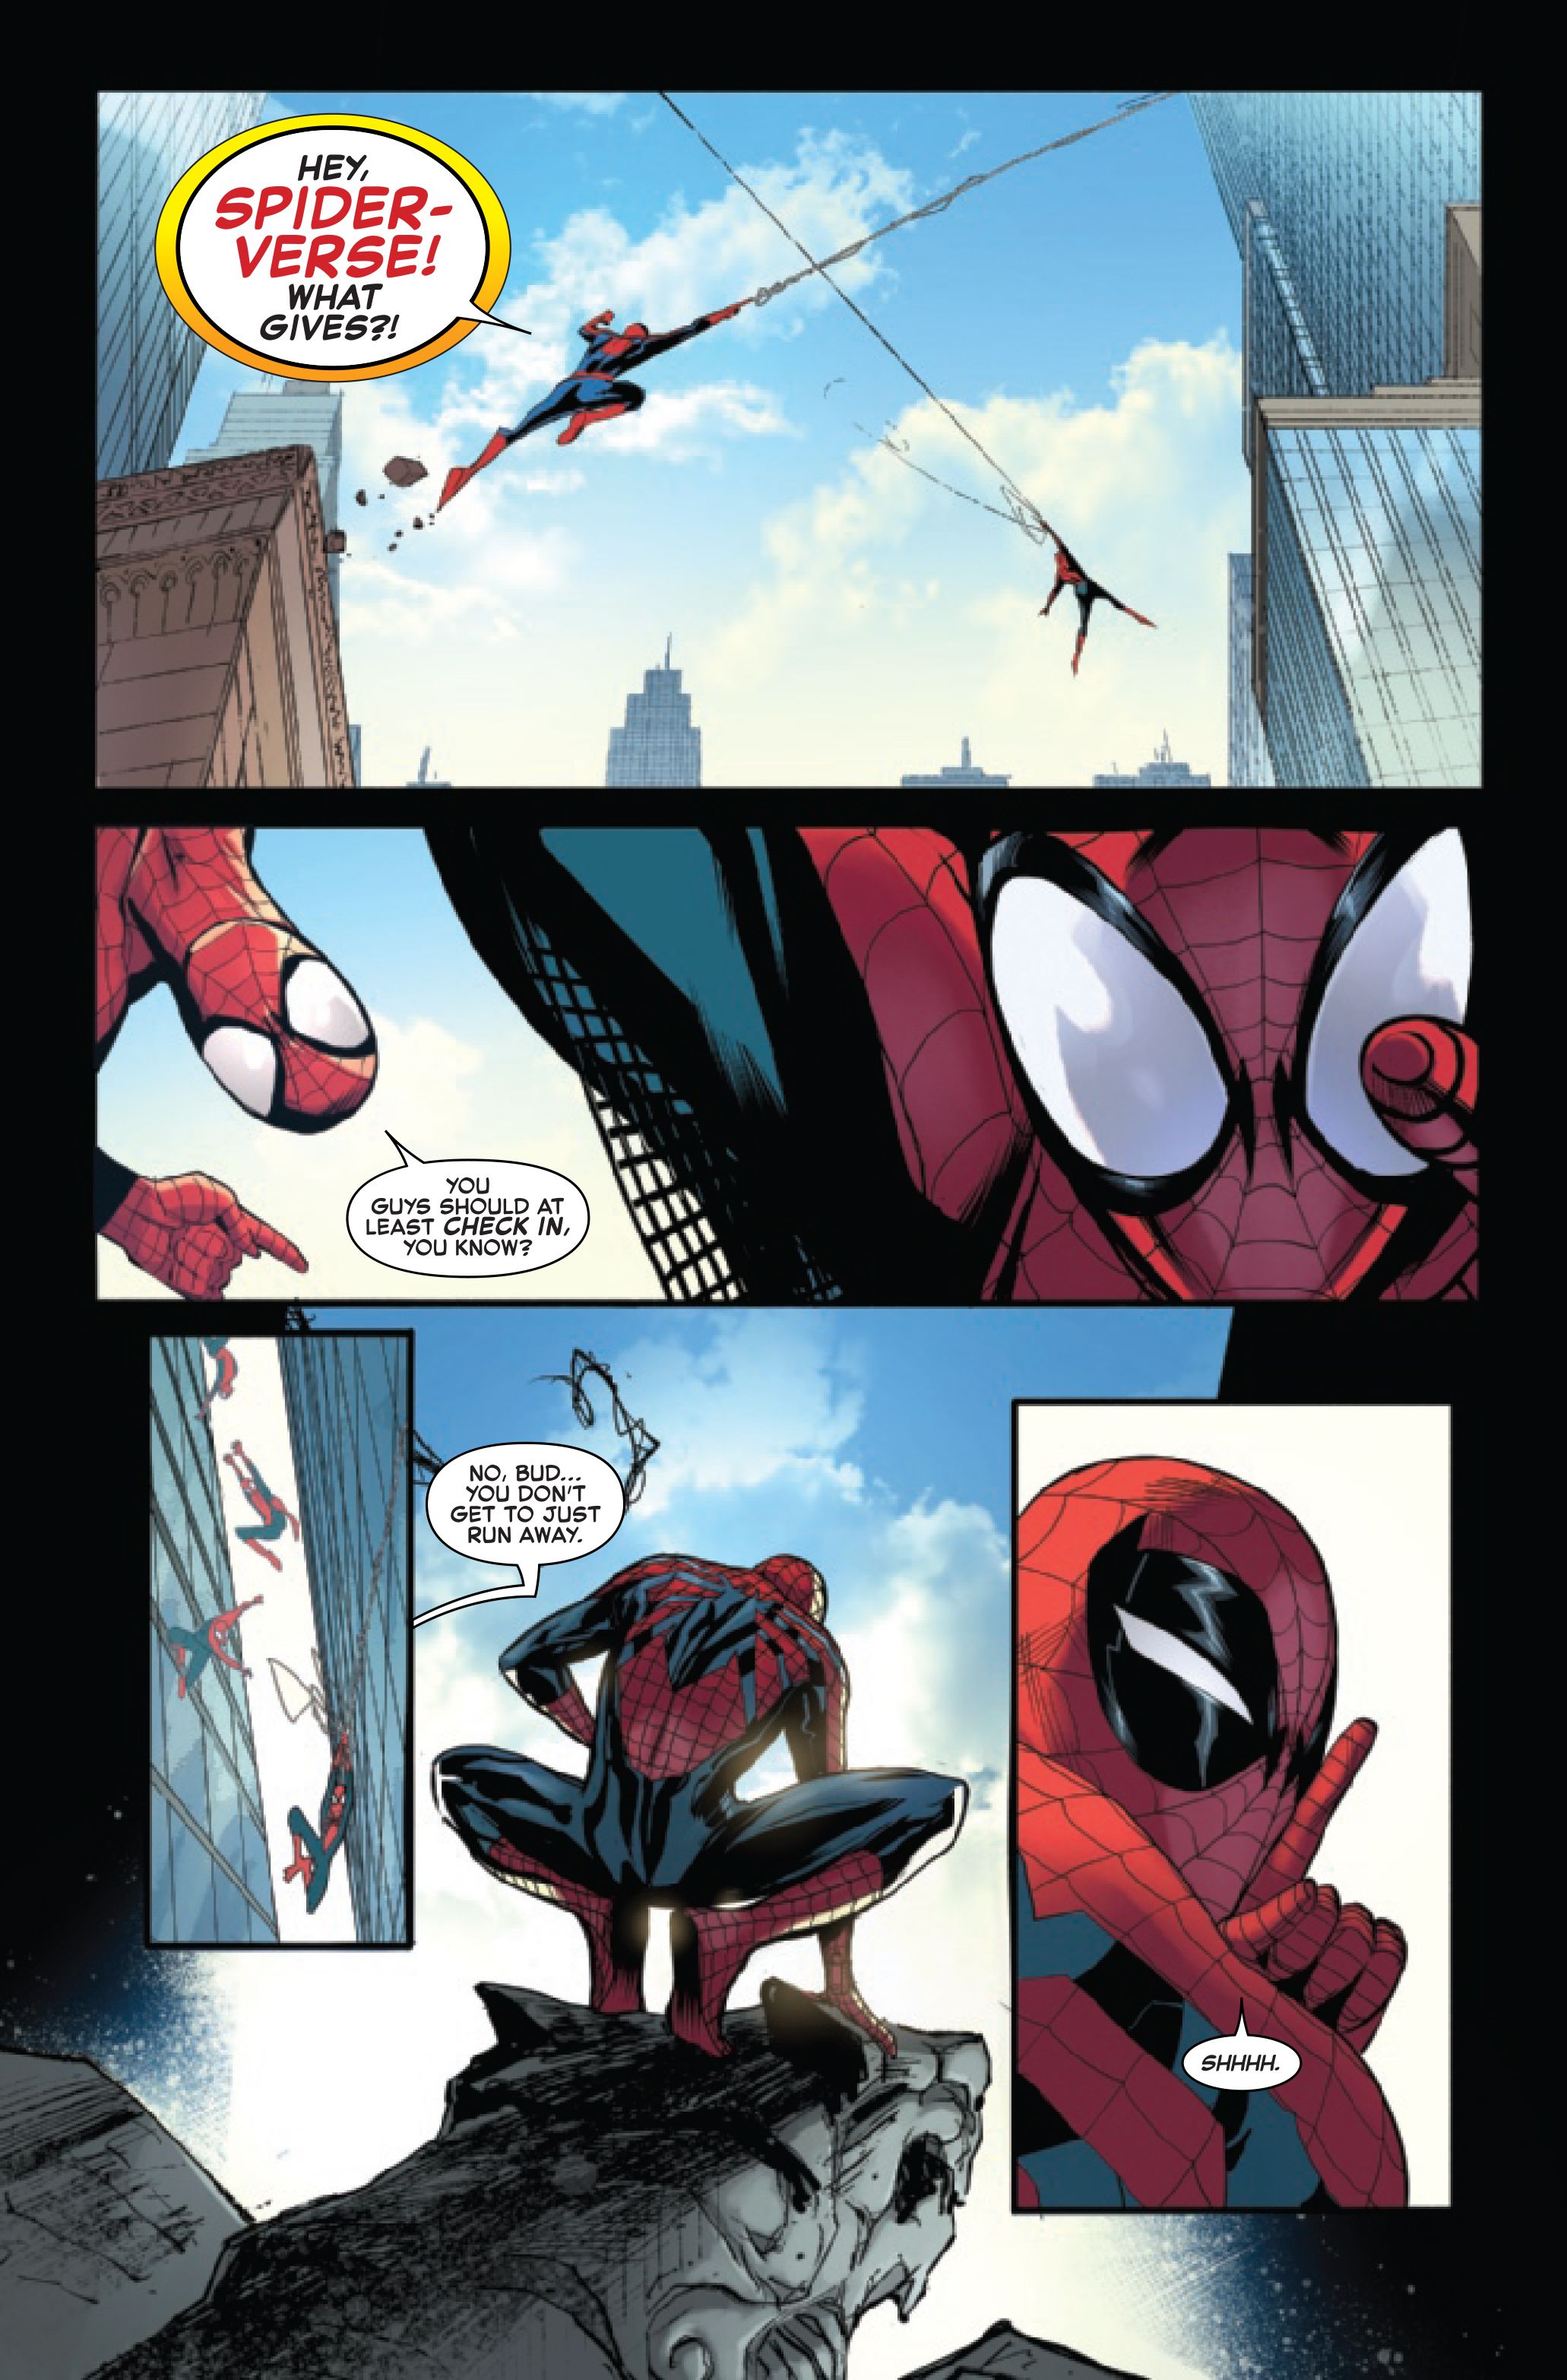 Amazing Spider-Man #75 page 7 by Zeb Wells and Patrick Gleason.